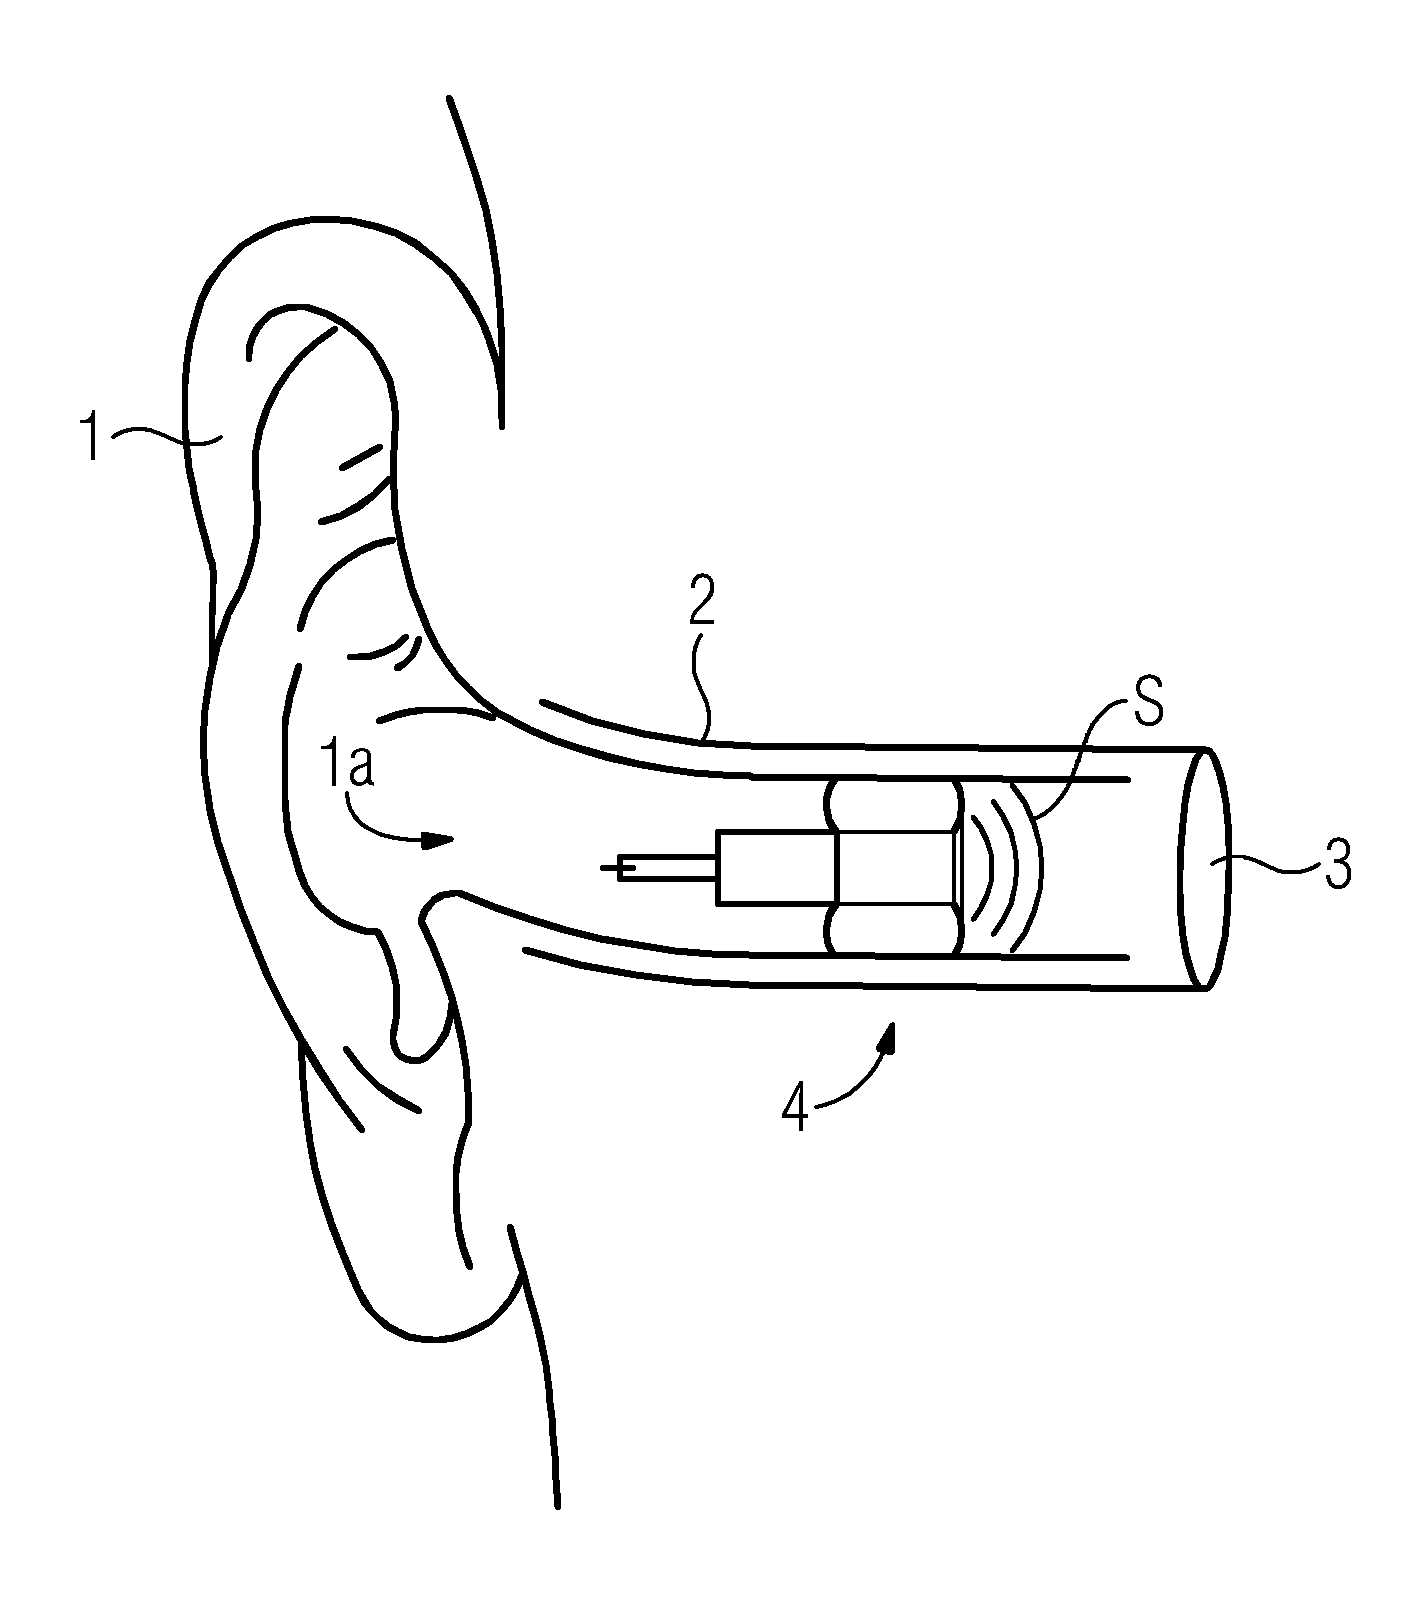 Inflatable ear mold connection system